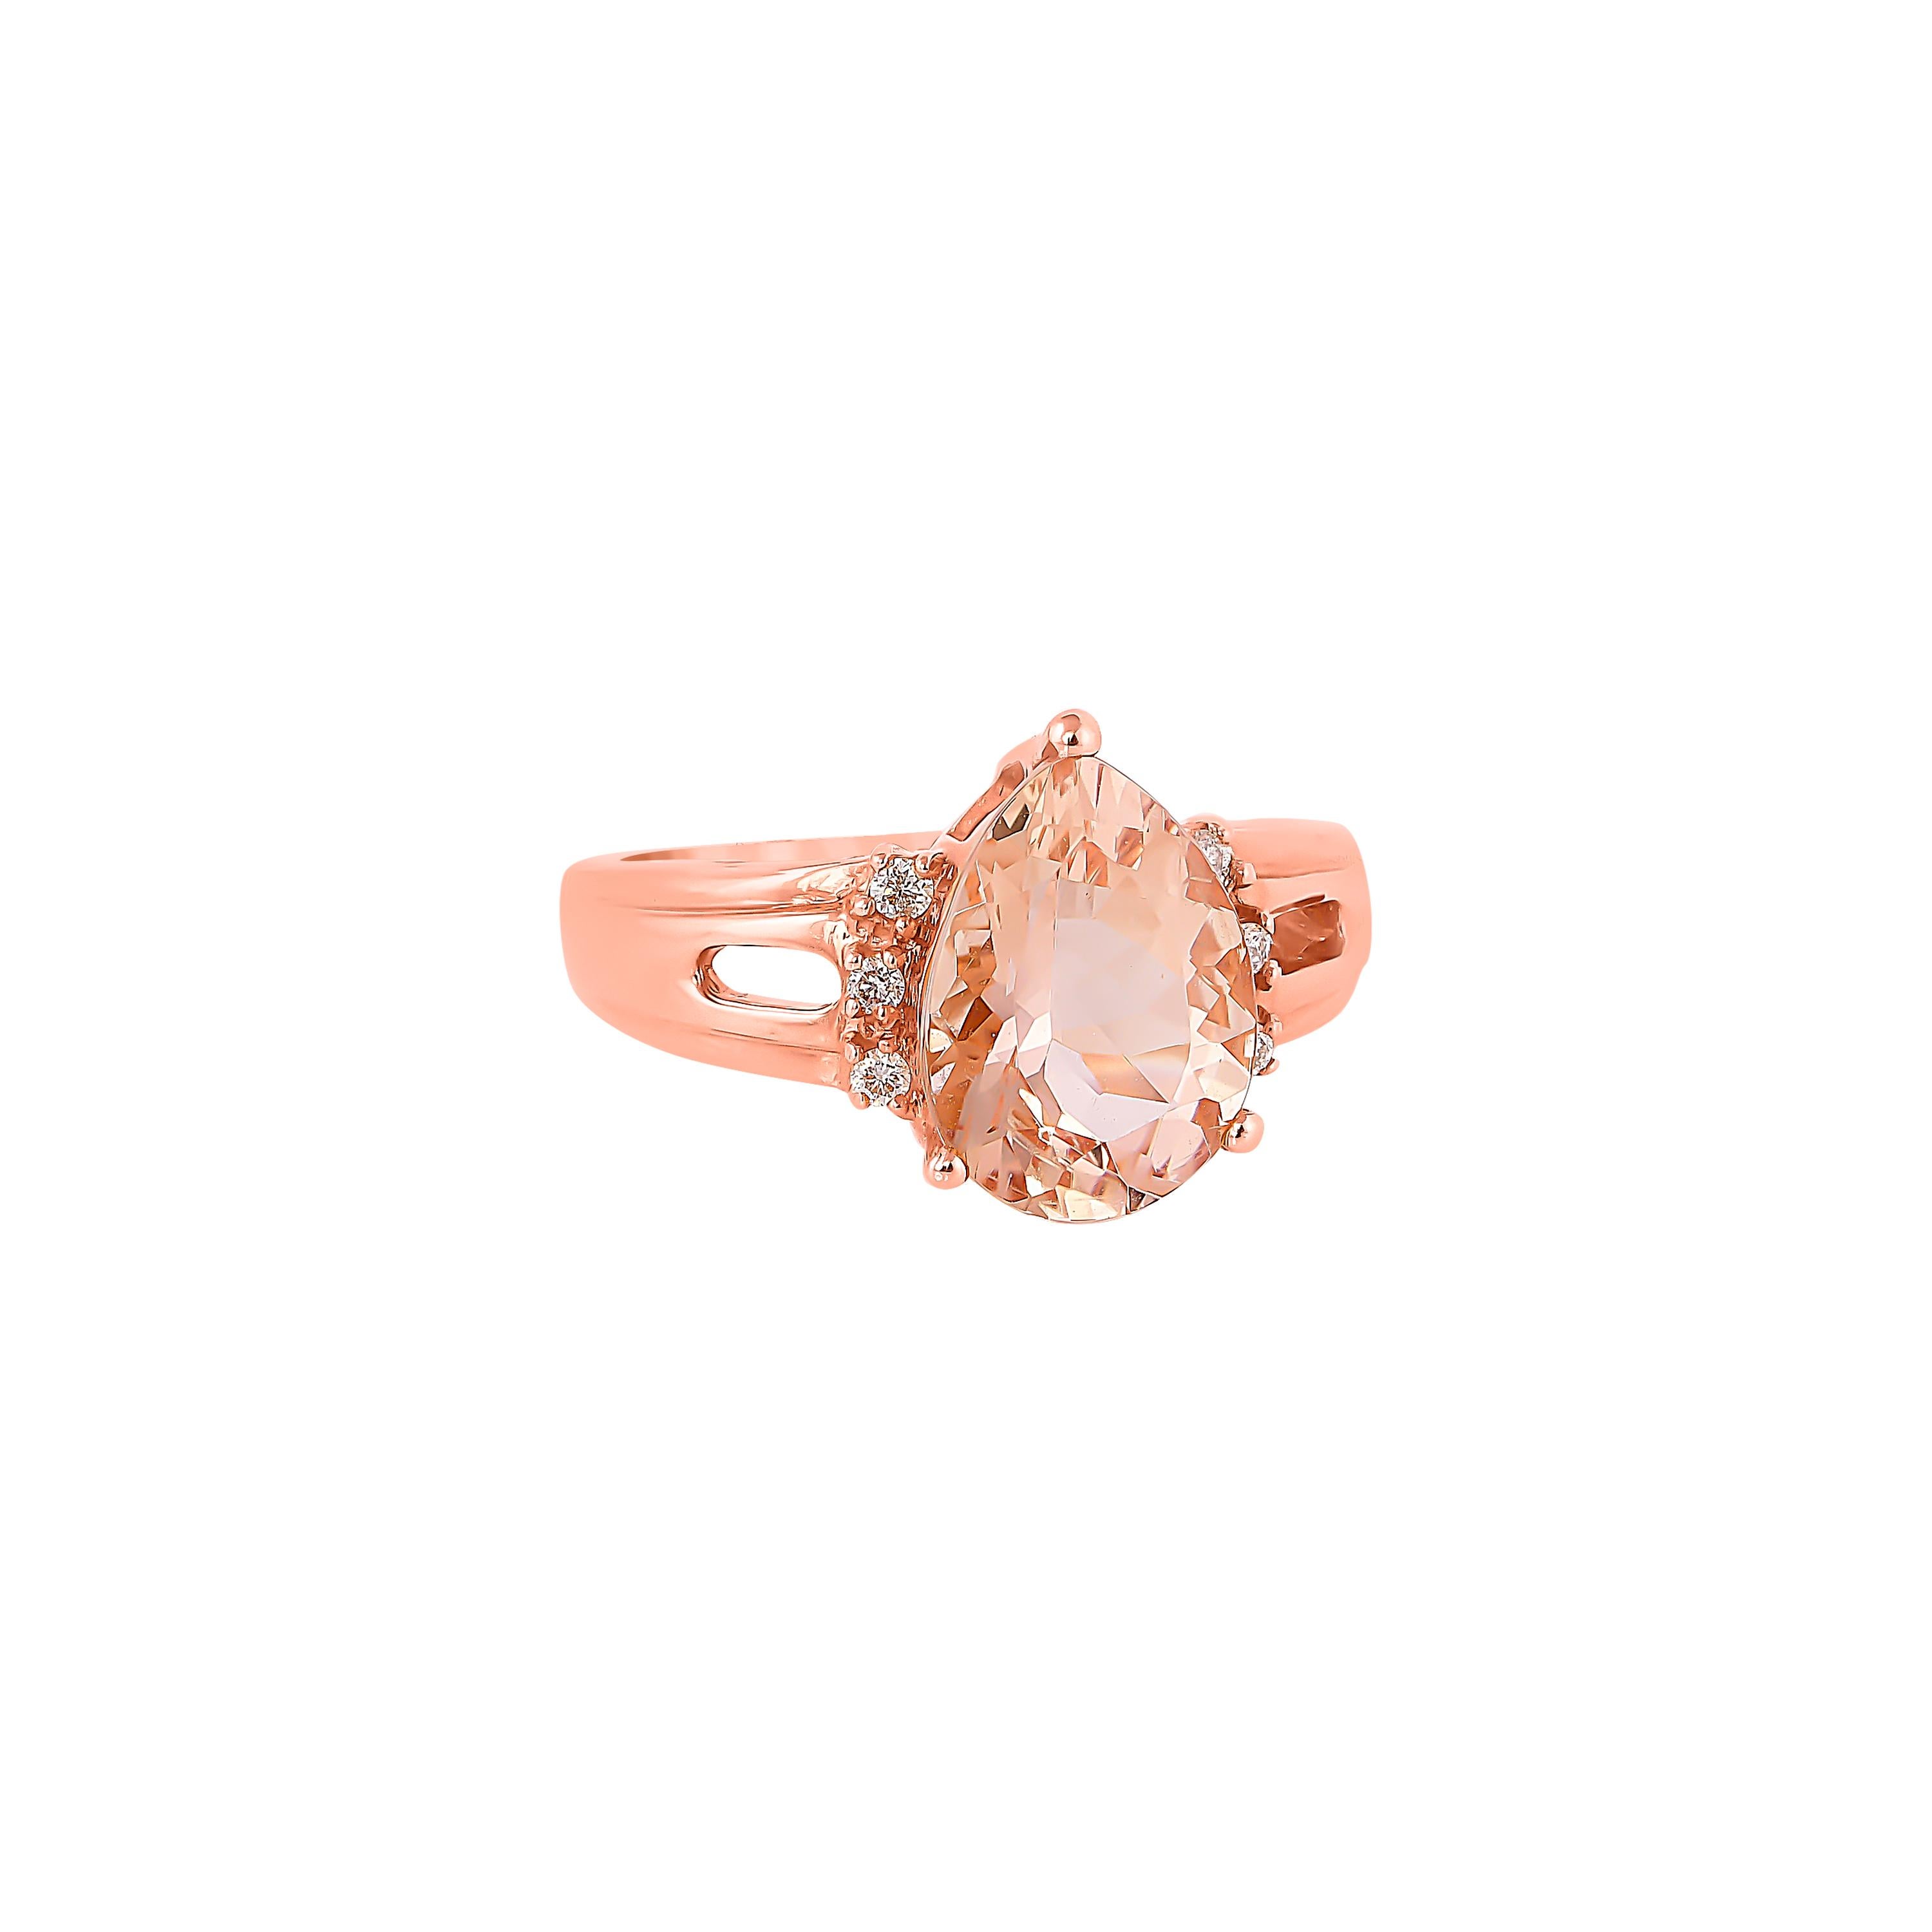 This collection features an array of magnificent morganites! Accented with diamonds these rings are made in rose gold and present a classic yet elegant look. 

Classic morganite ring in 18K rose gold with diamonds. 

Morganite: 3.35 carat pear